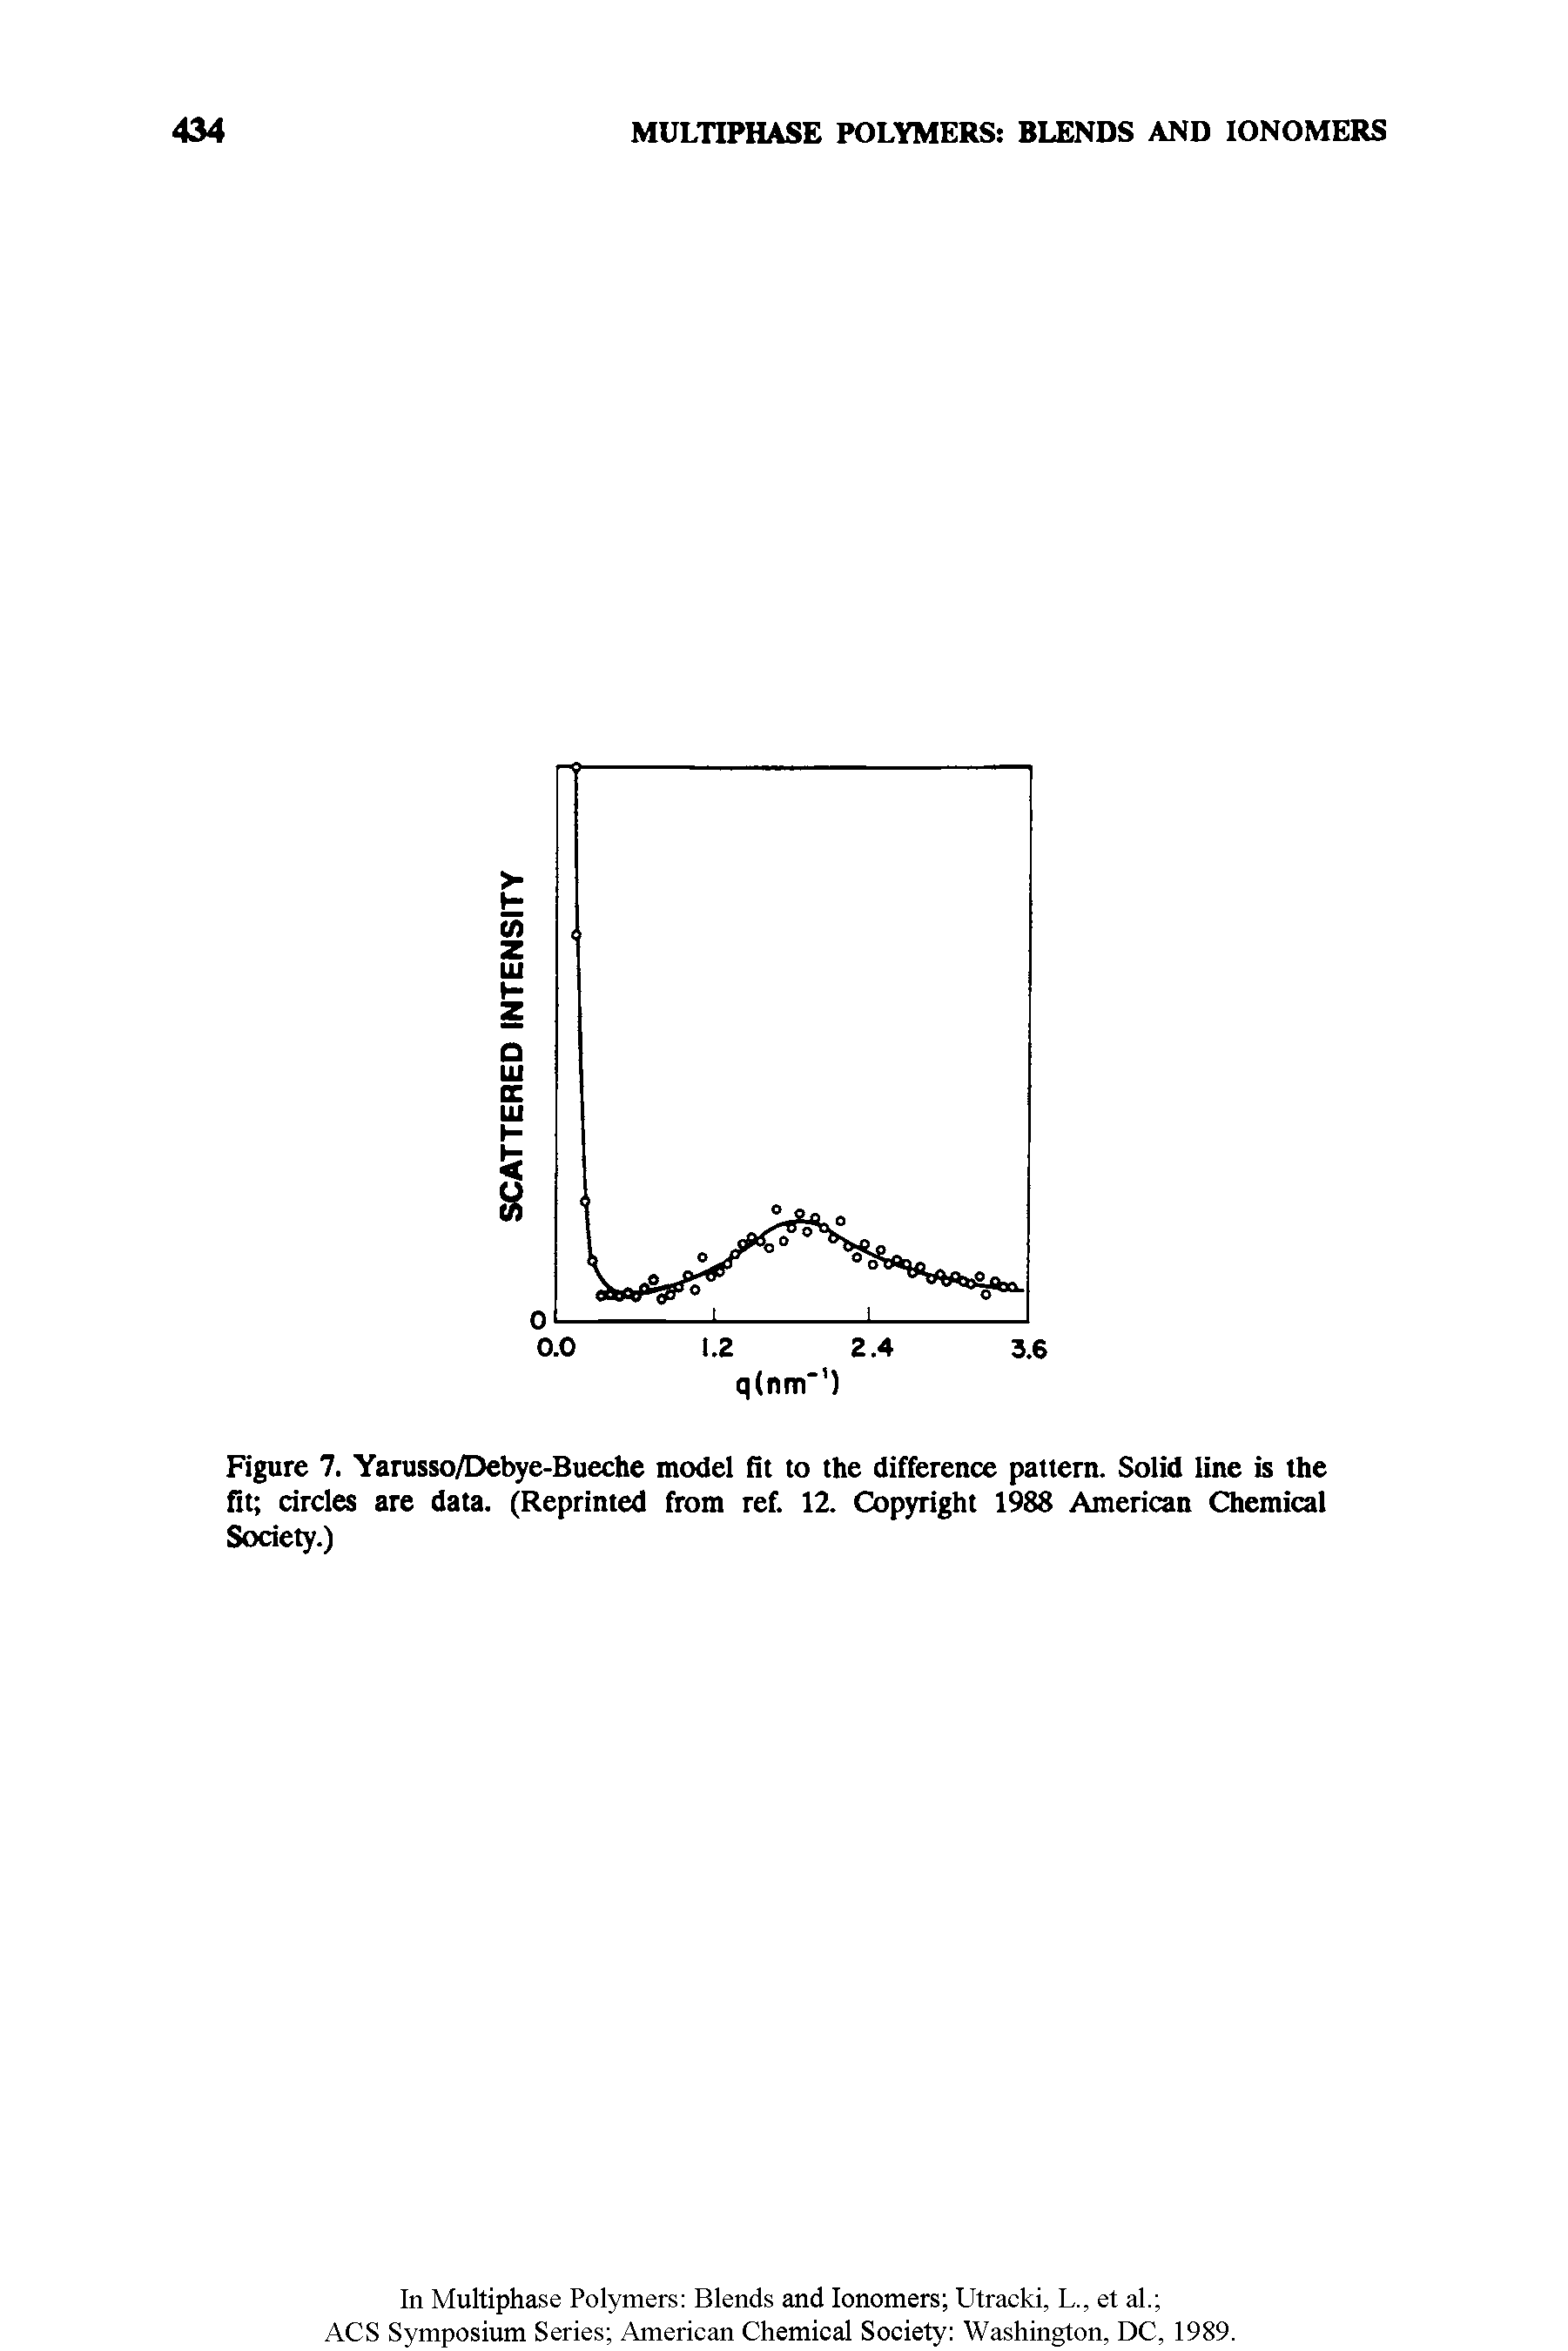 Figure 7. Yarusso/Debye-Bueche model fit to the difference pattern. Solid line is the fit circles are data. (Reprinted from ref. 12. Copyright 1988 American Chemical Society.)...